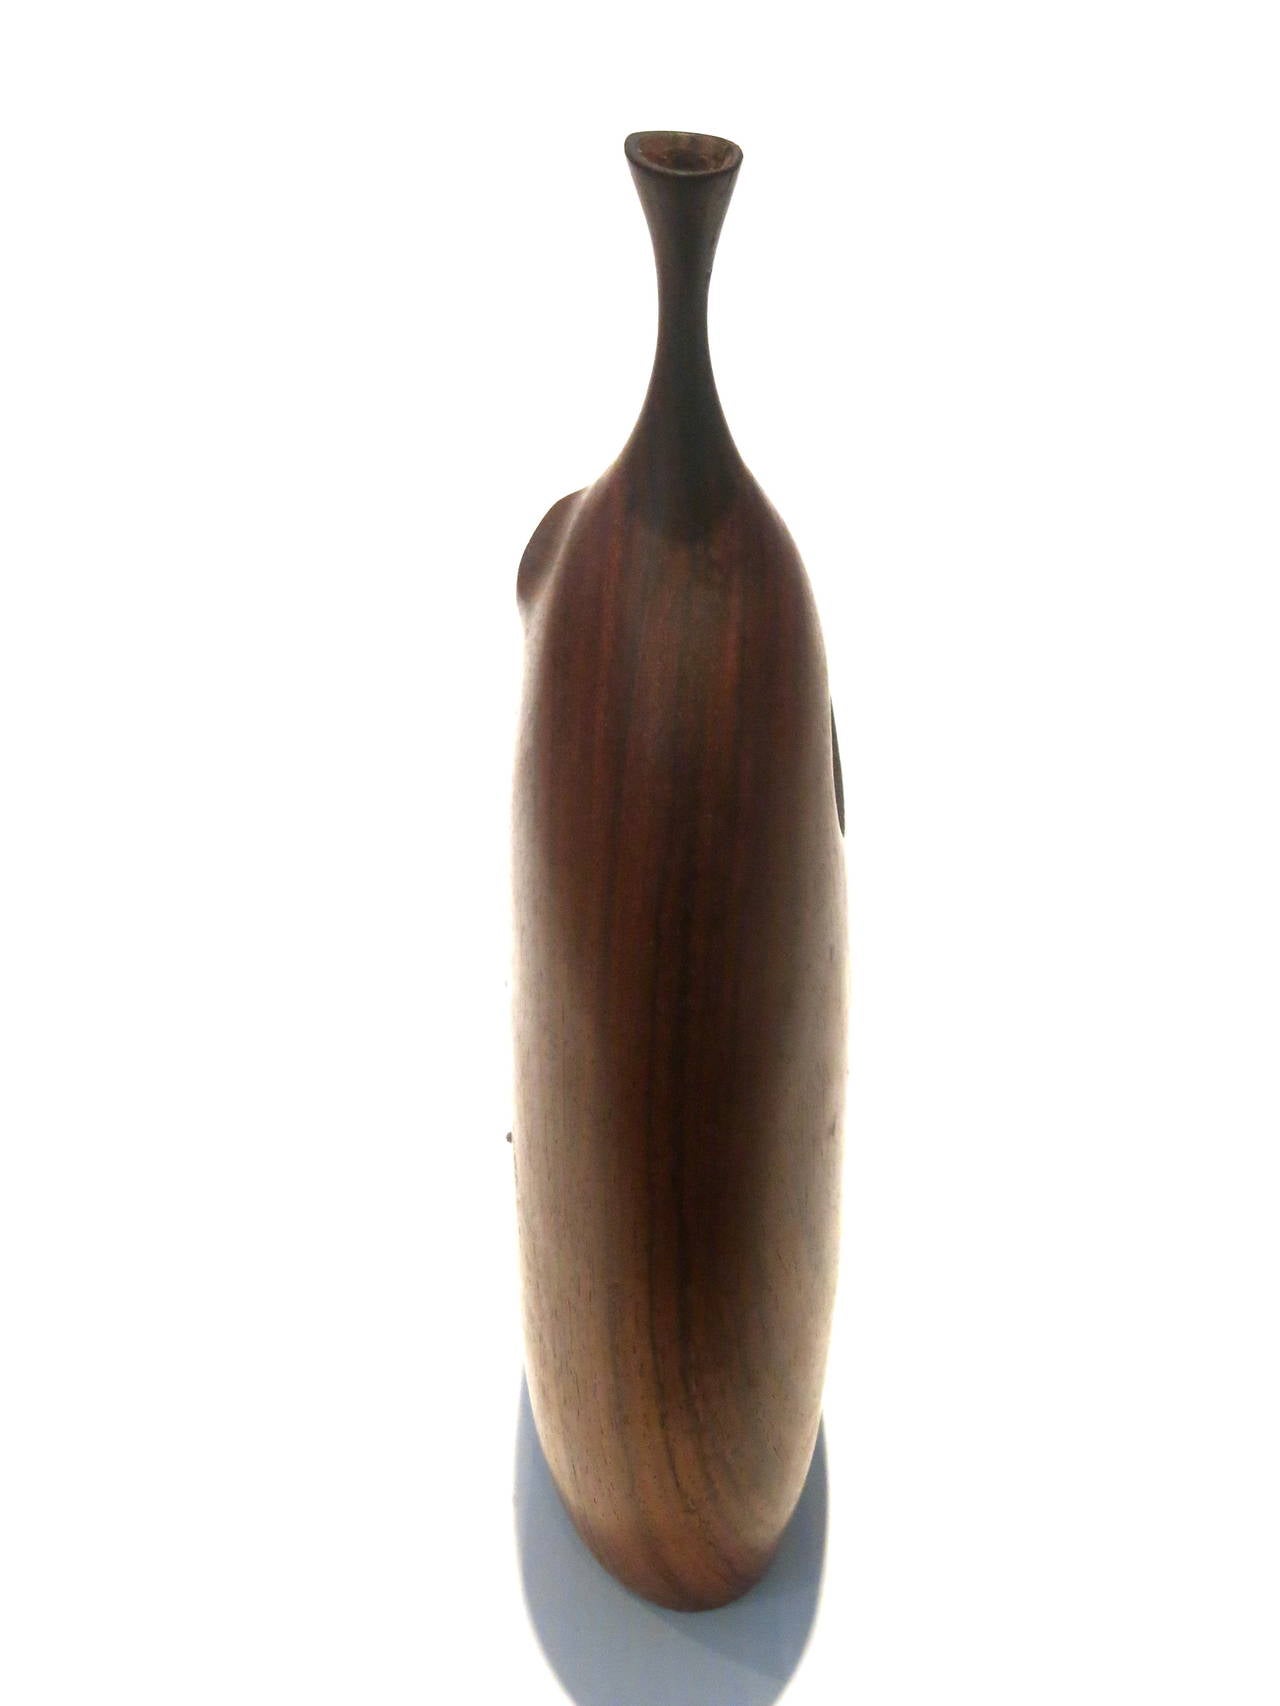 American 1960s California Design Mid-Century Modern Hand-Carved Wood Vase by Doug Ayers